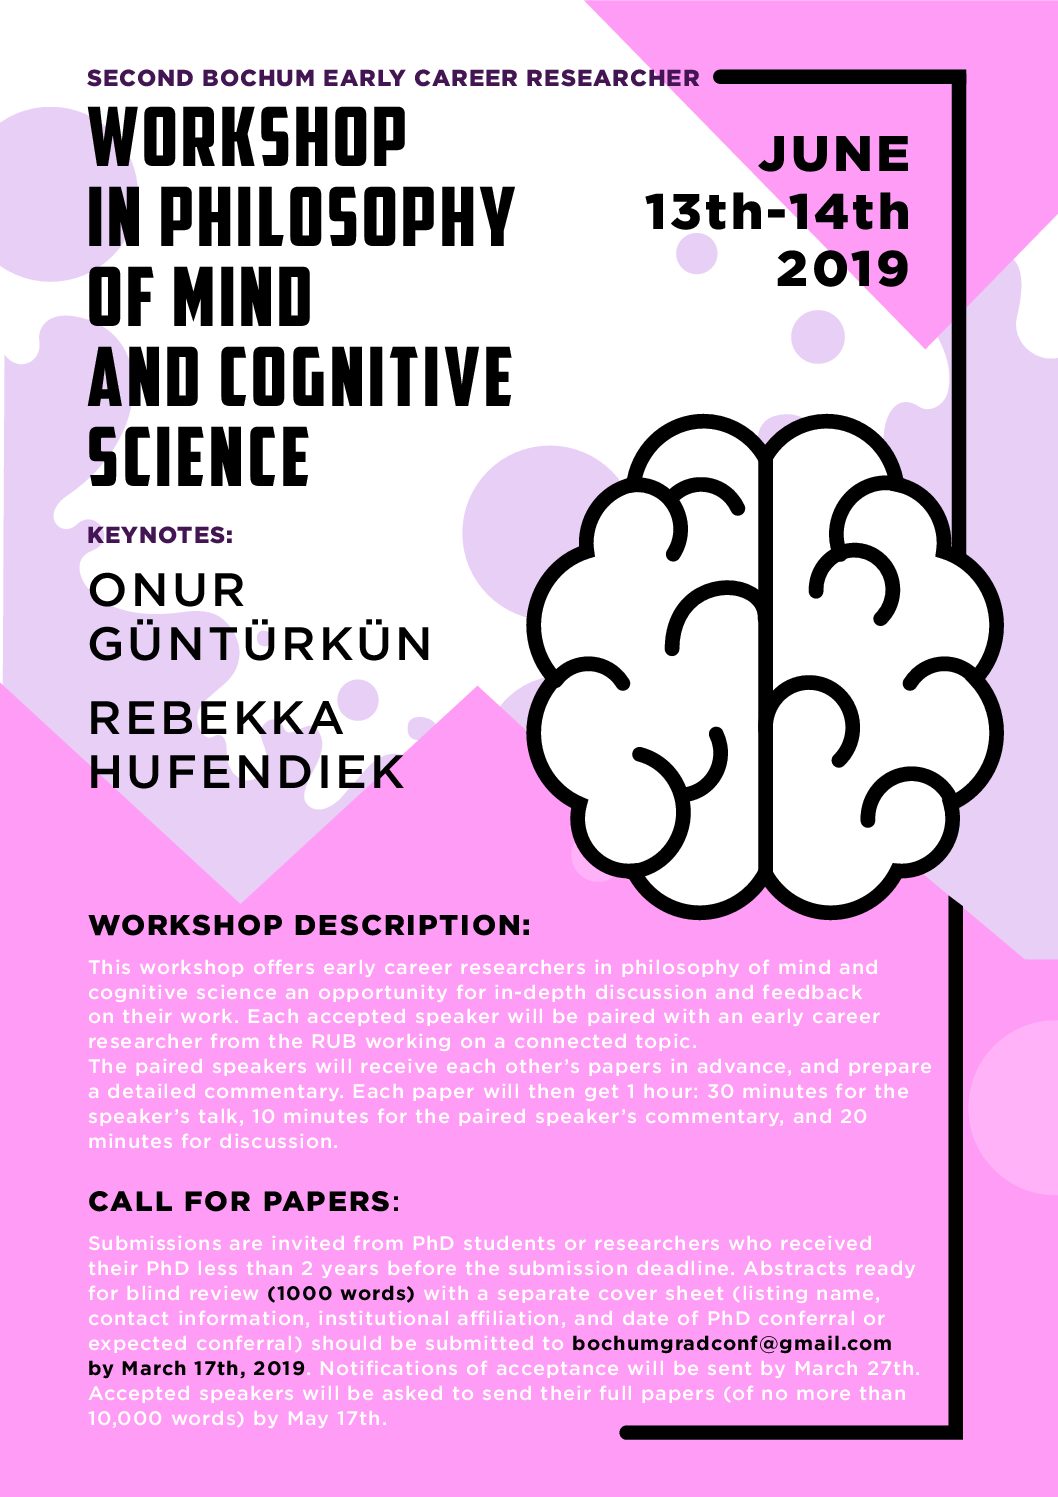 CFP: Early Career Researcher Workshop in Philosophy of Mind and of Cognitive Science (Bochum)